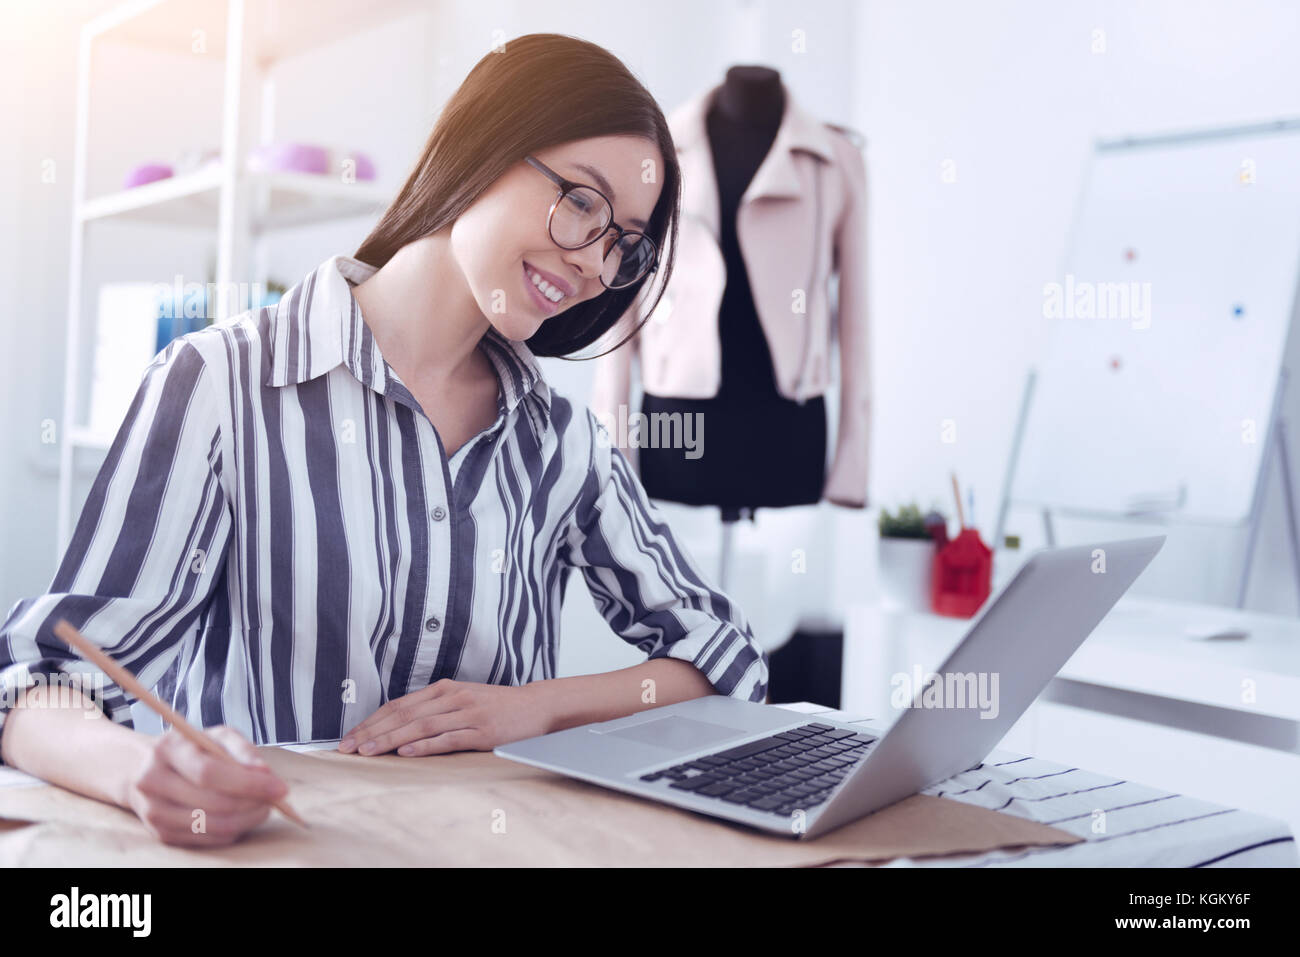 Cheerful young employee looking at the screen of her laptop Stock Photo